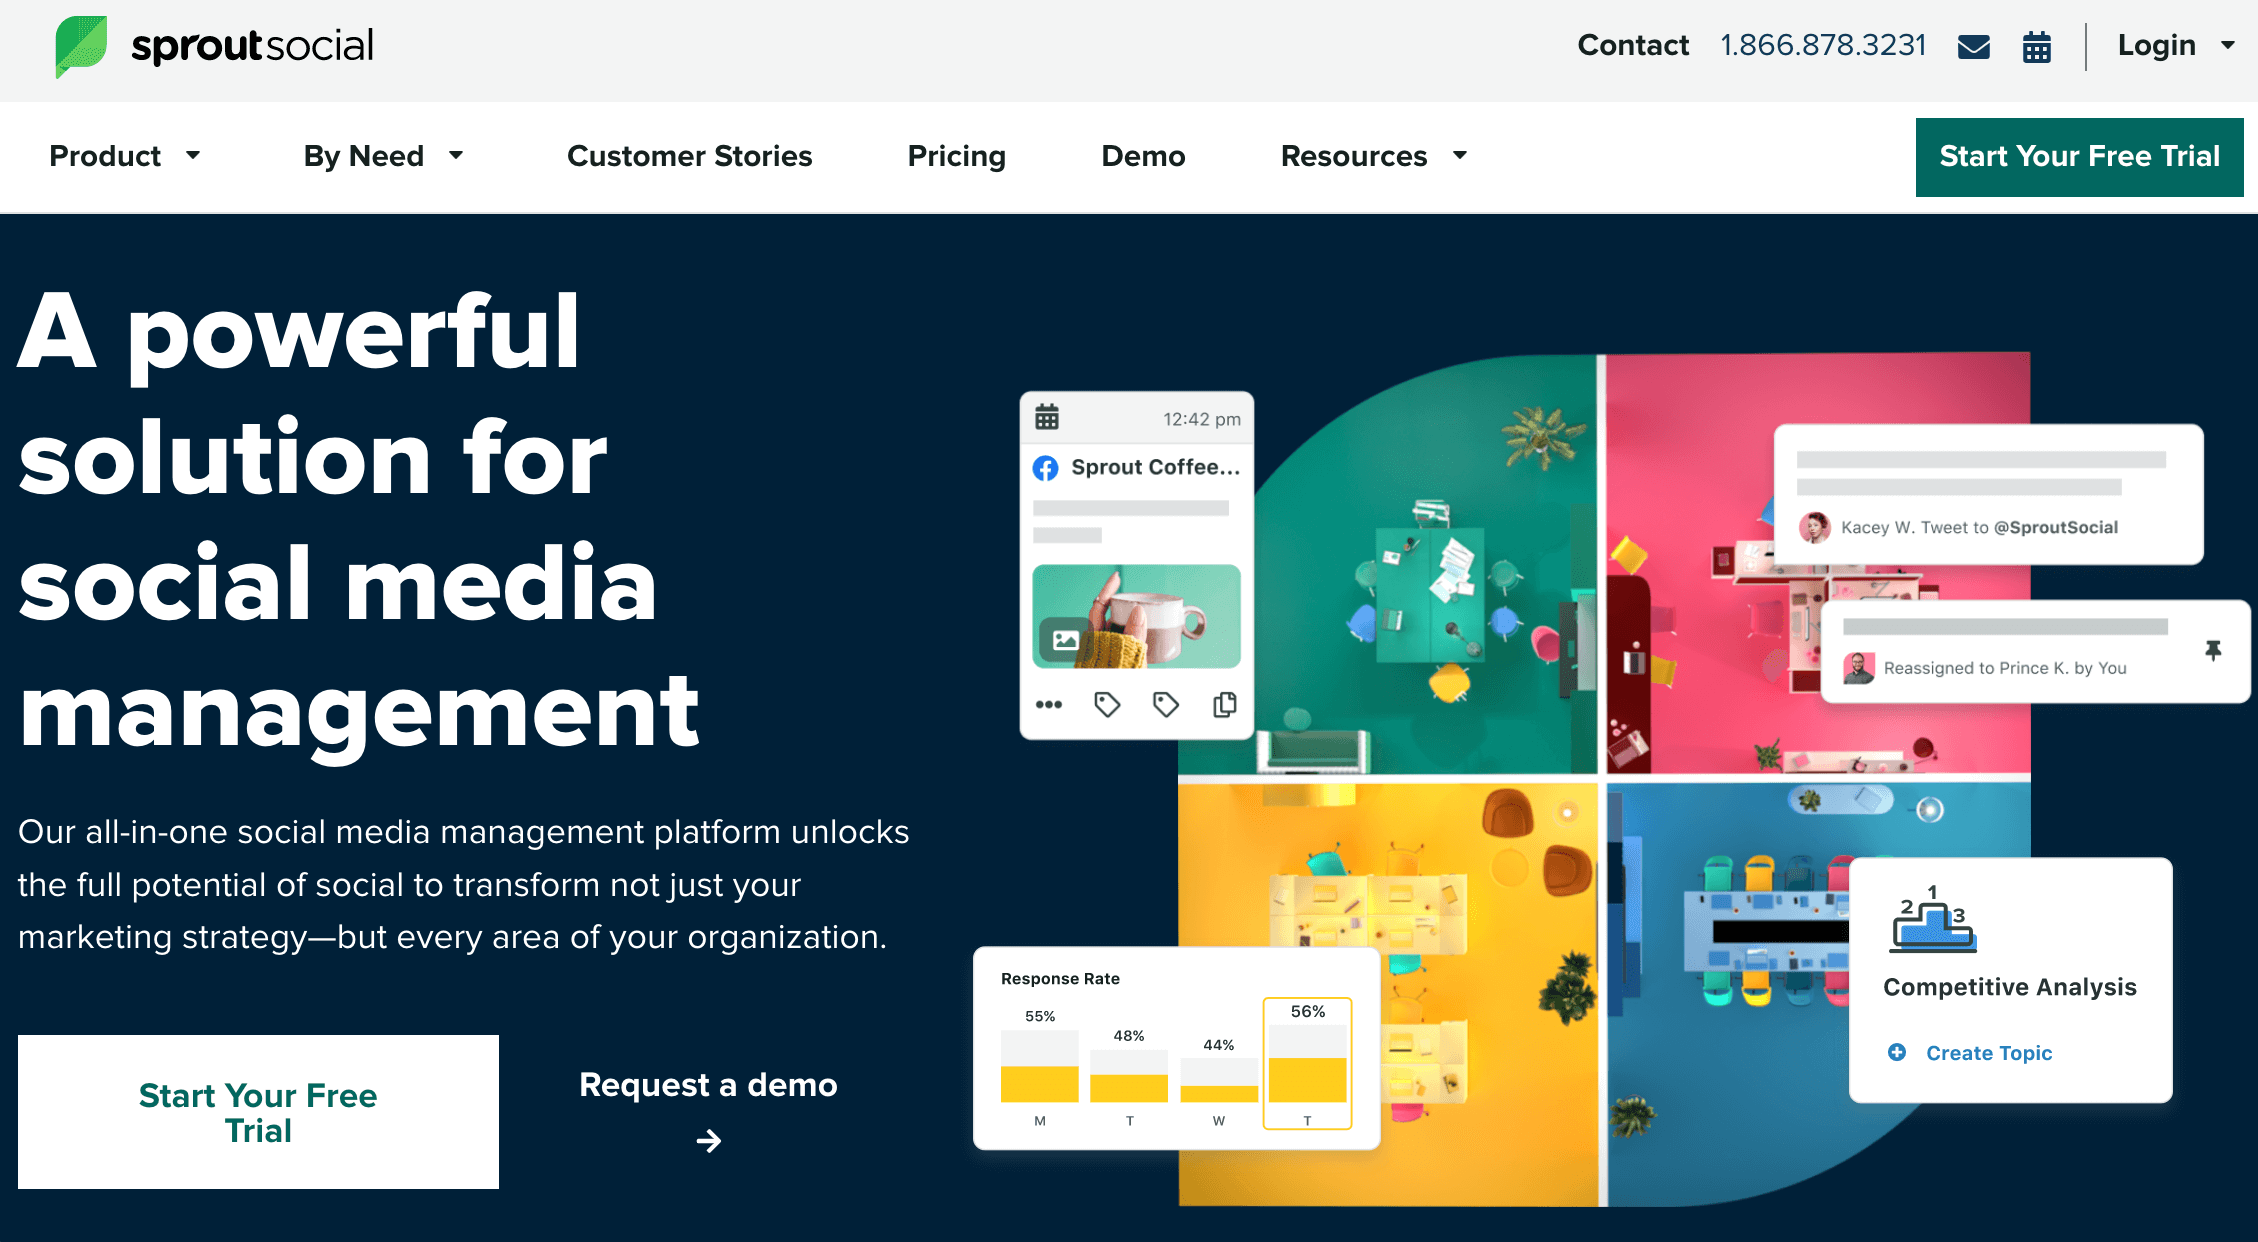 Sprout Social's homepage